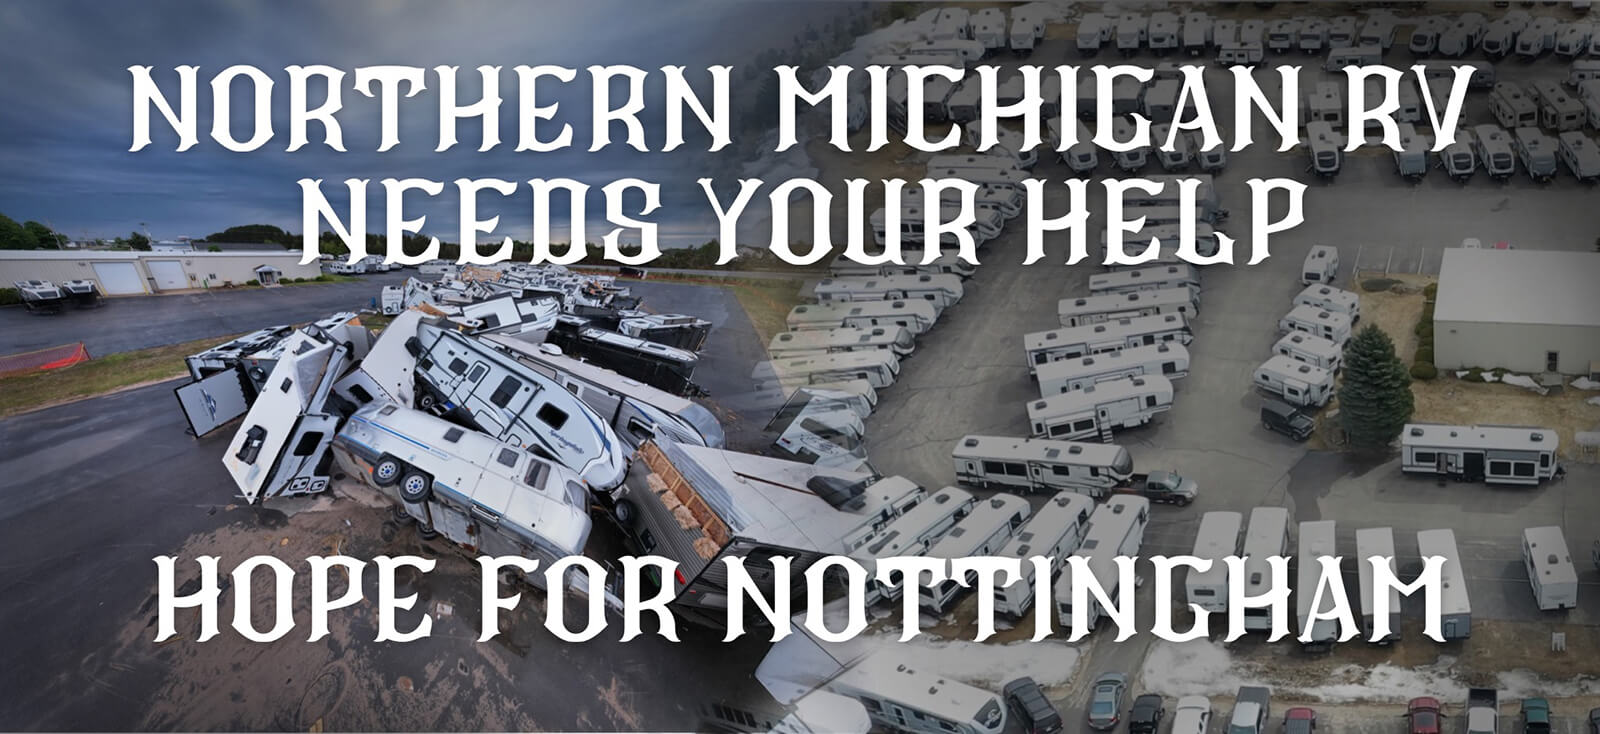 Northern Michigan RV Needs Your Help! Hope for Nottingham